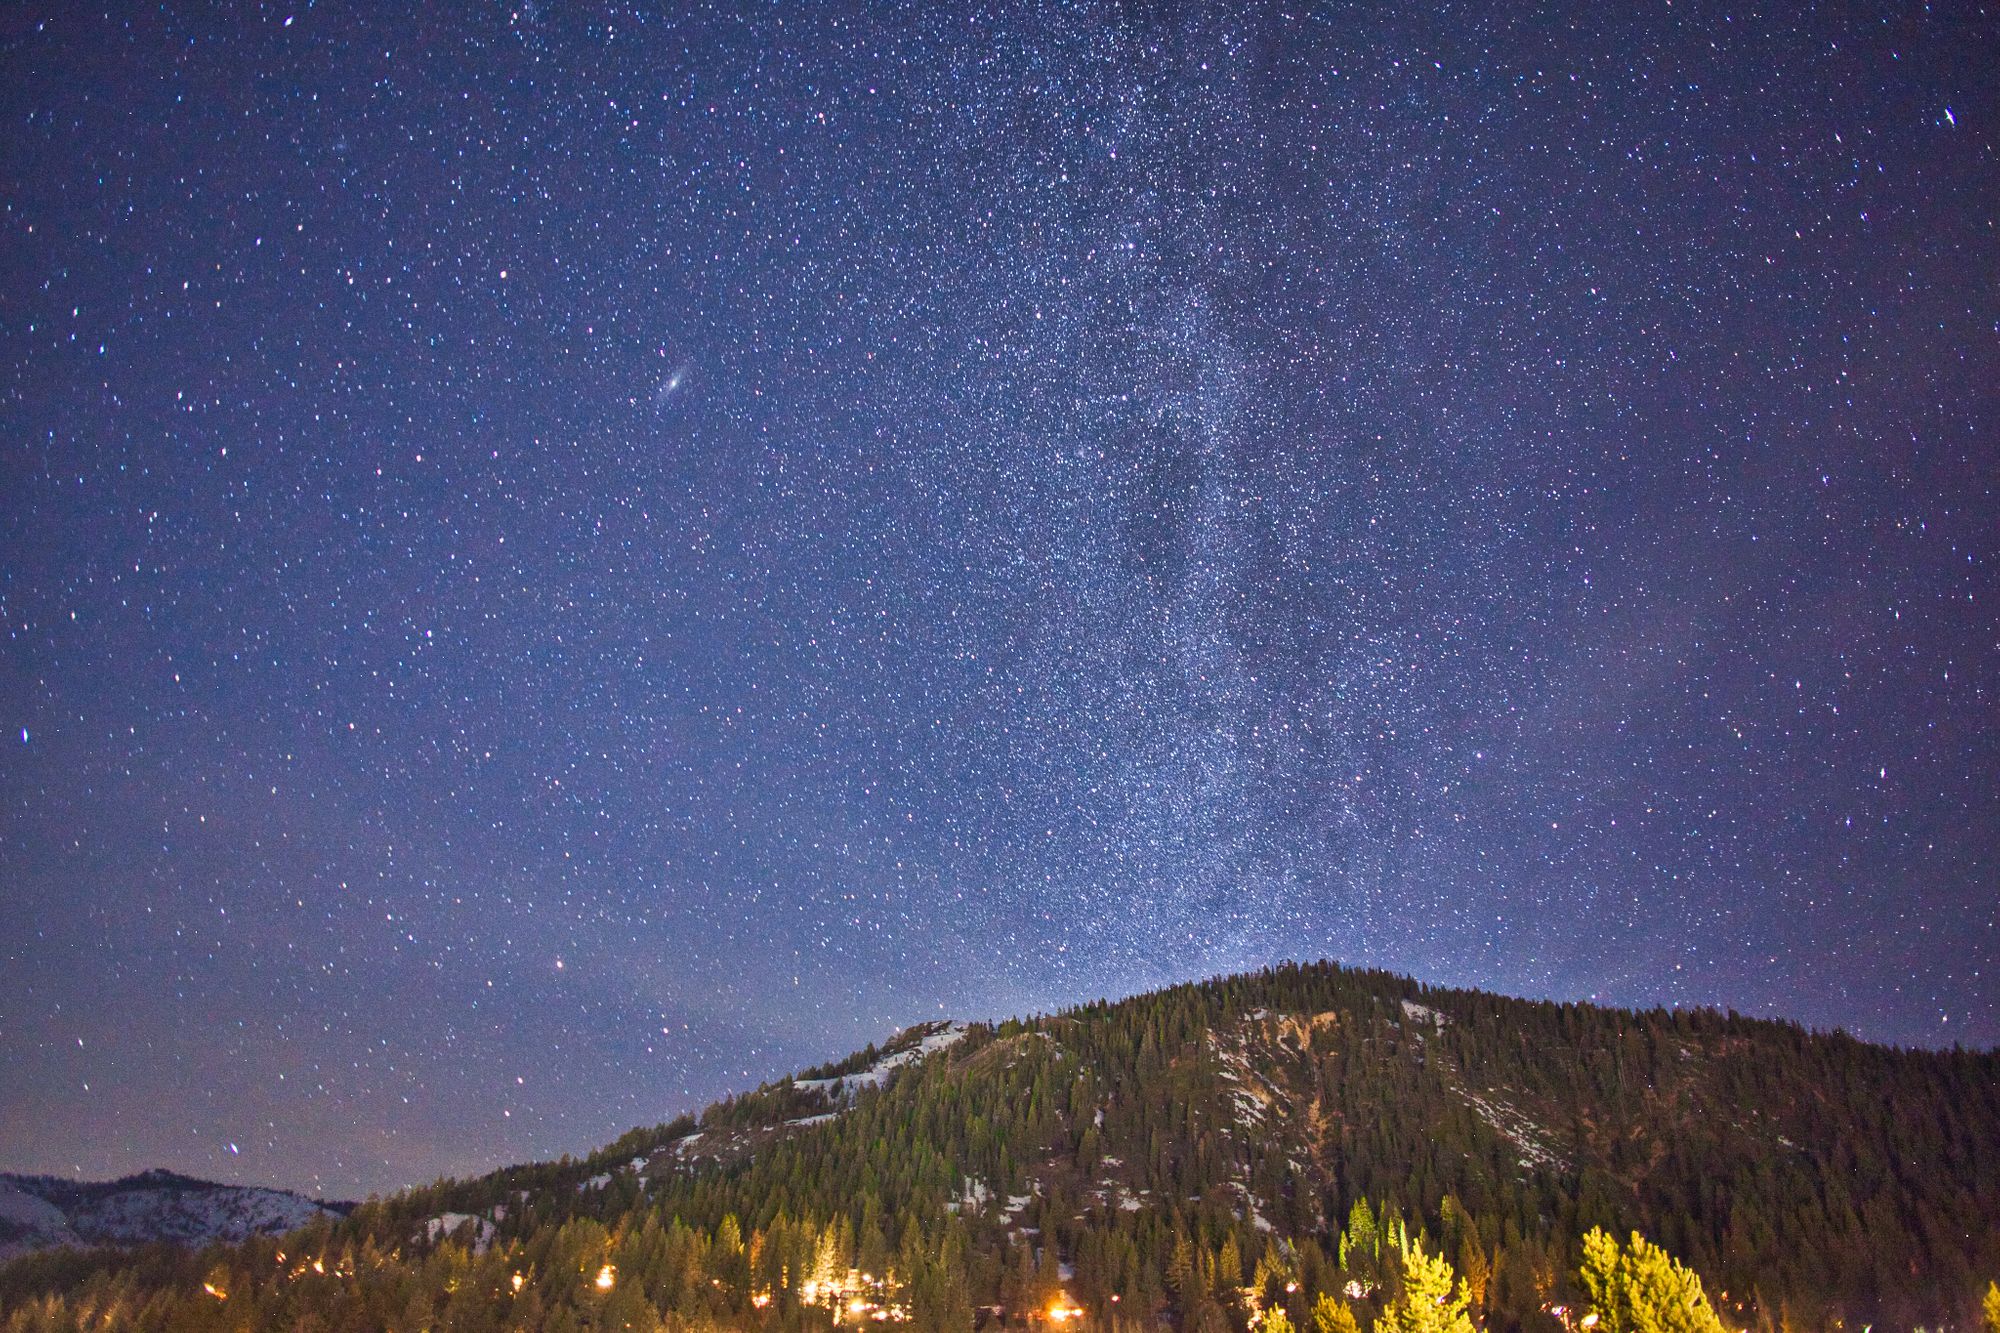 Stars over Squaw Valley